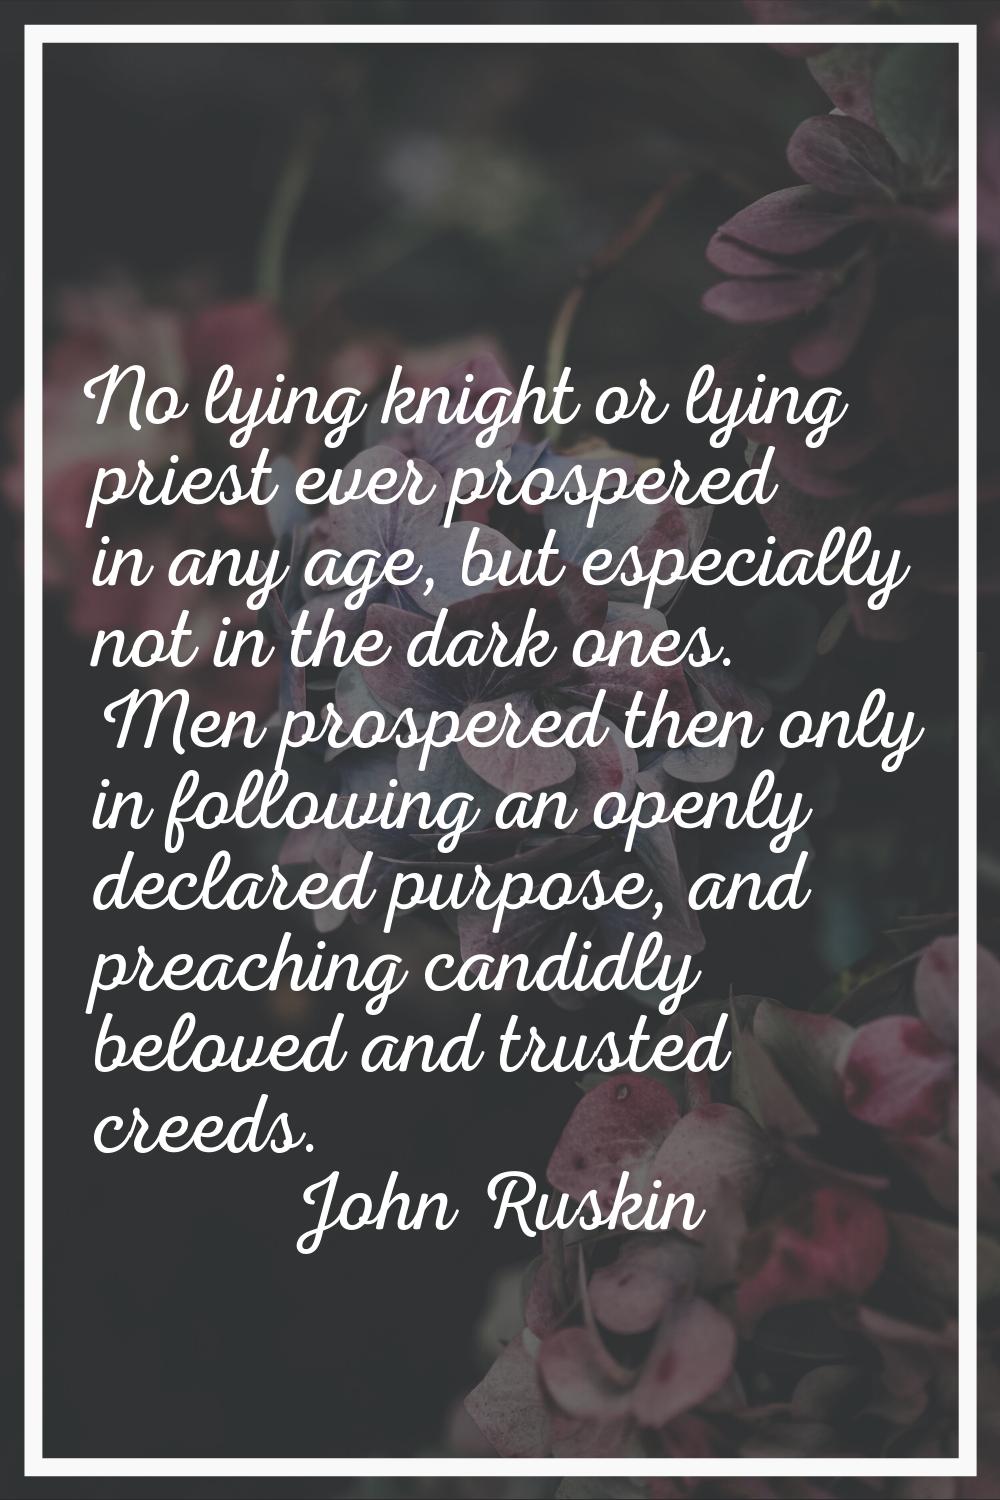 No lying knight or lying priest ever prospered in any age, but especially not in the dark ones. Men